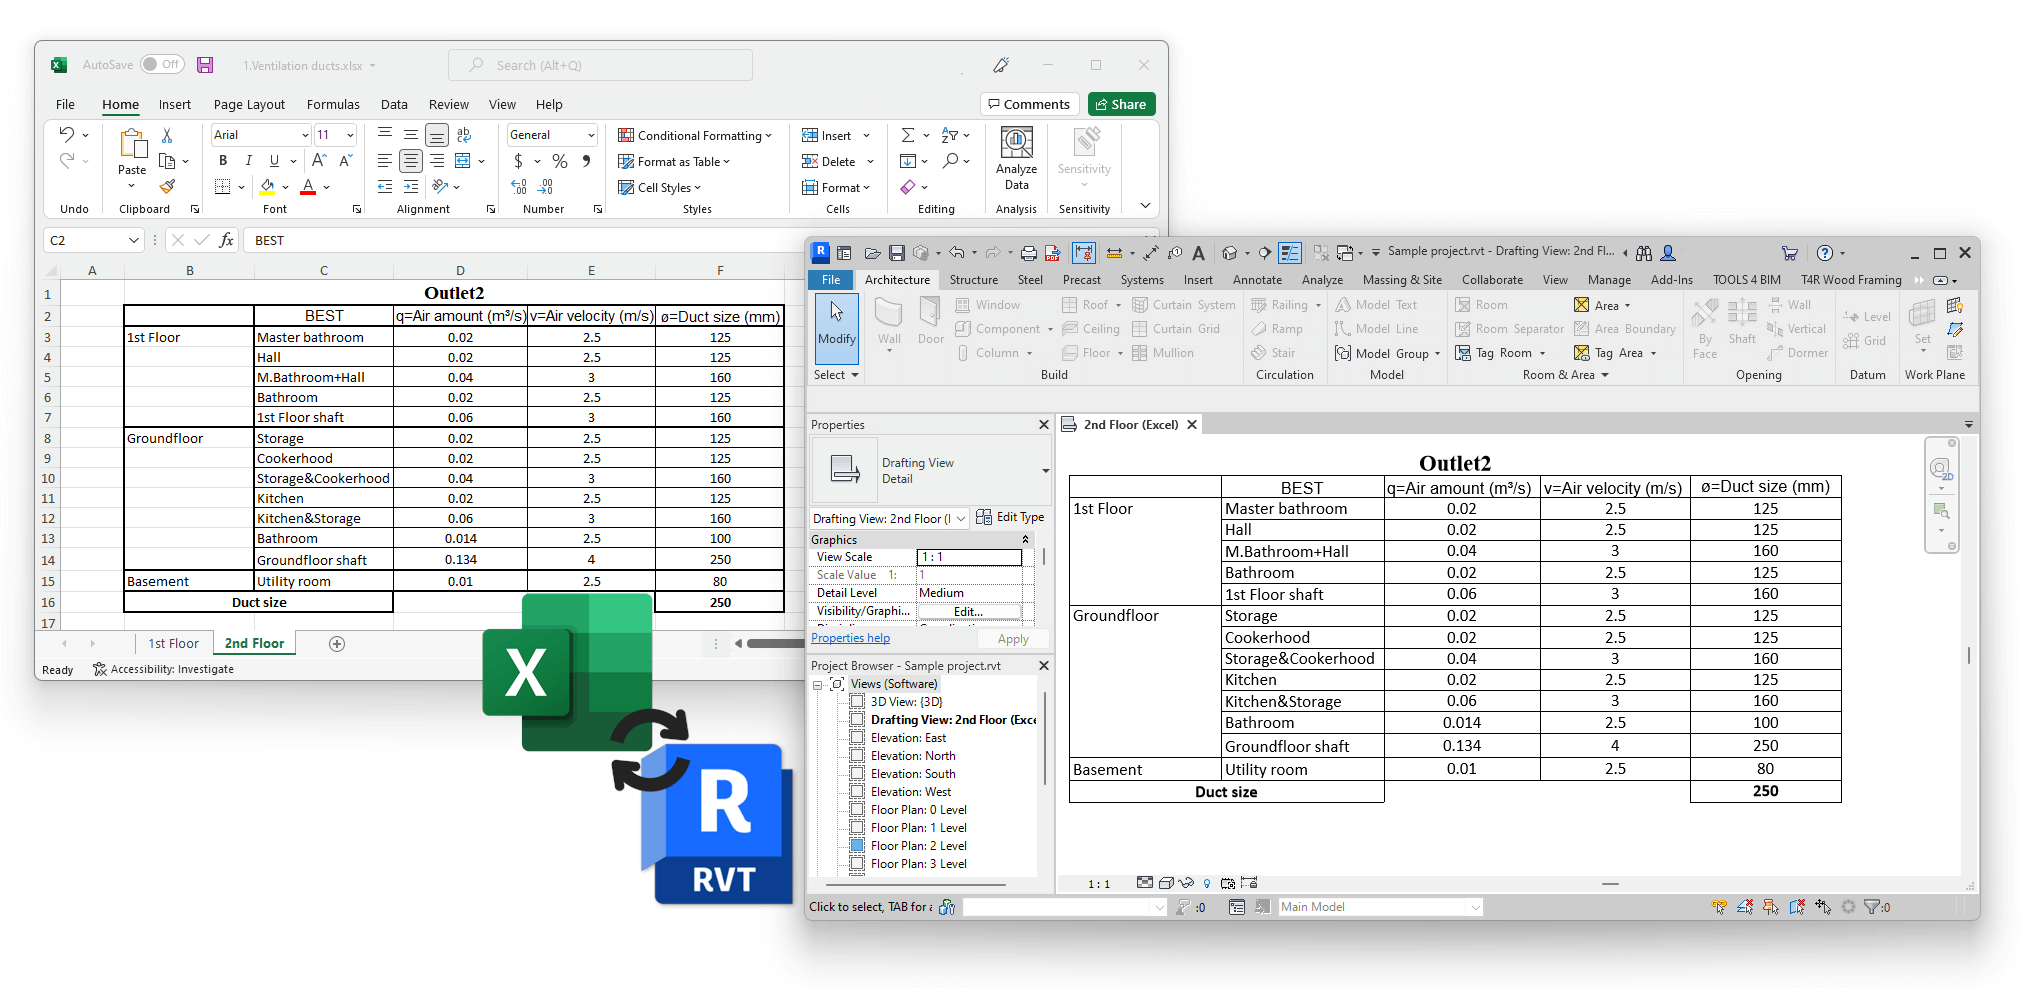 compatible with Excel